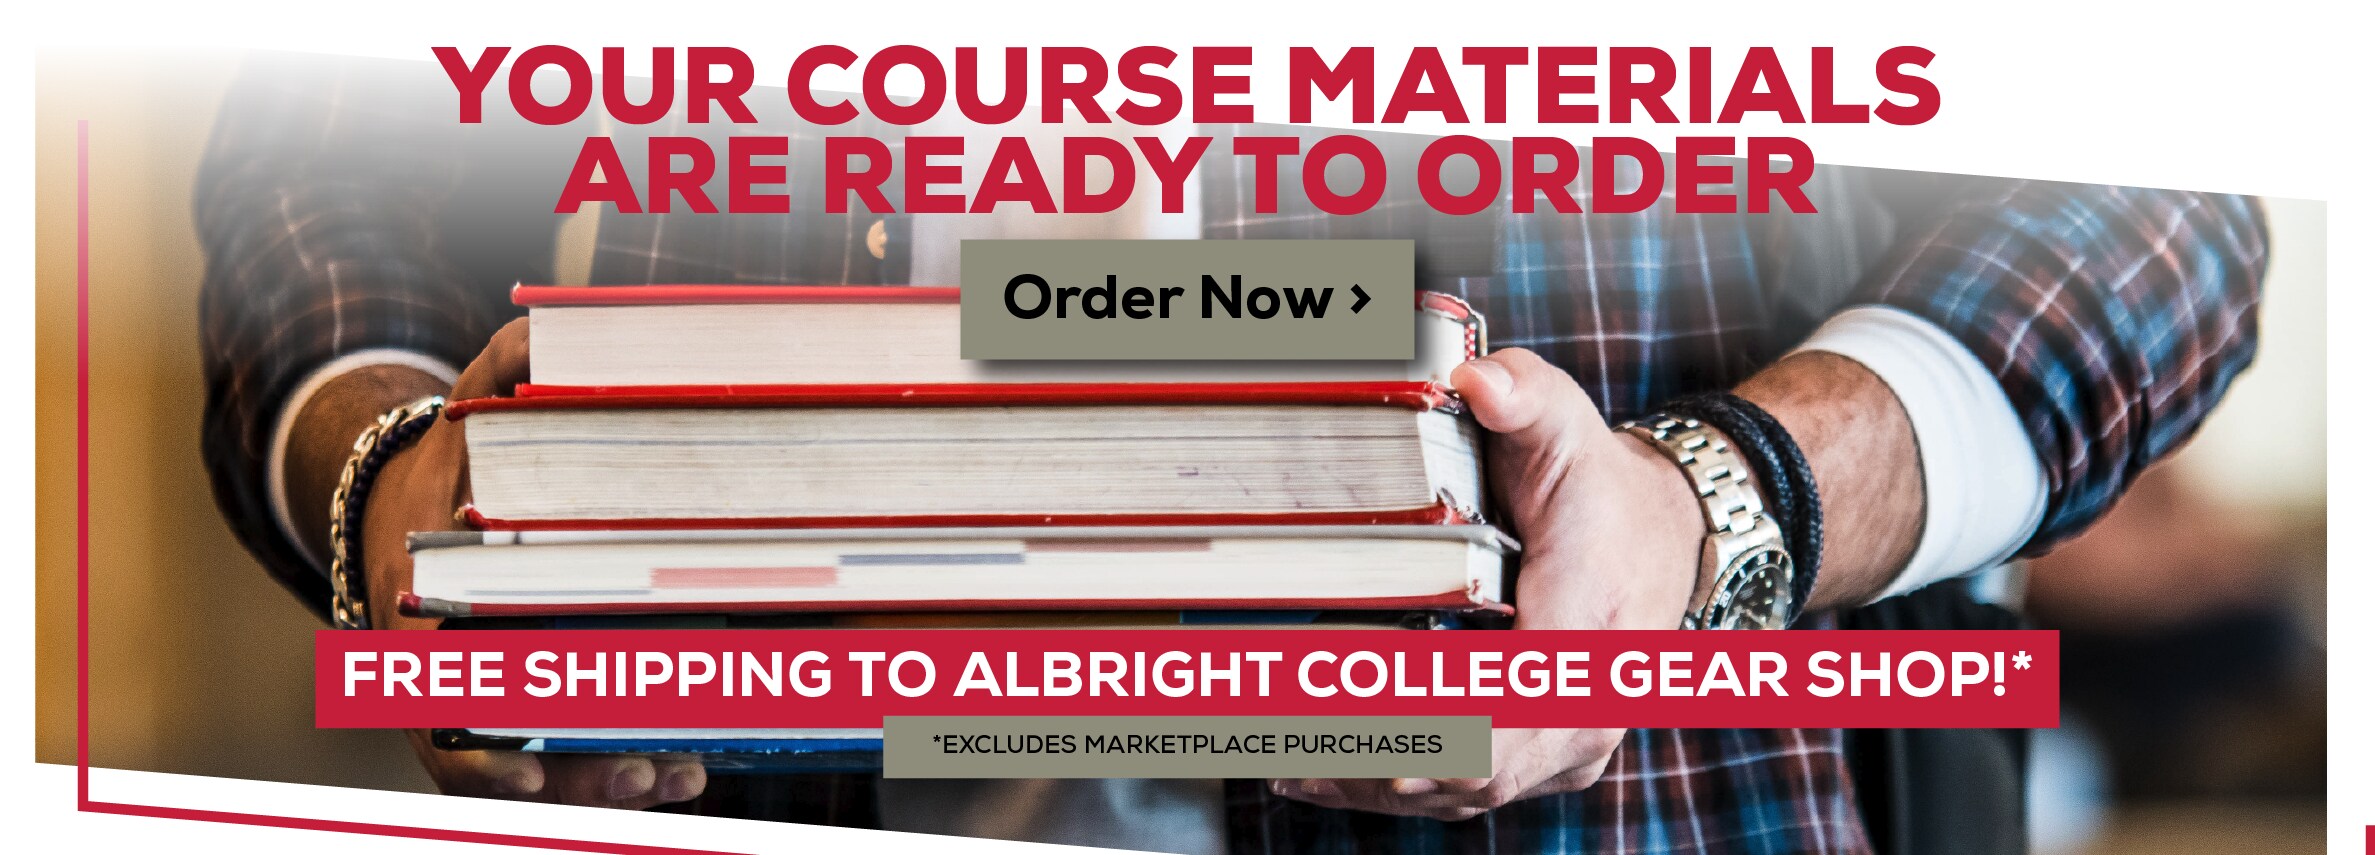 Your Course Materials are Ready to Order. Order Now. Free shipping on orders to Albright College Gear Shop! *Excludes marketplace purchases.